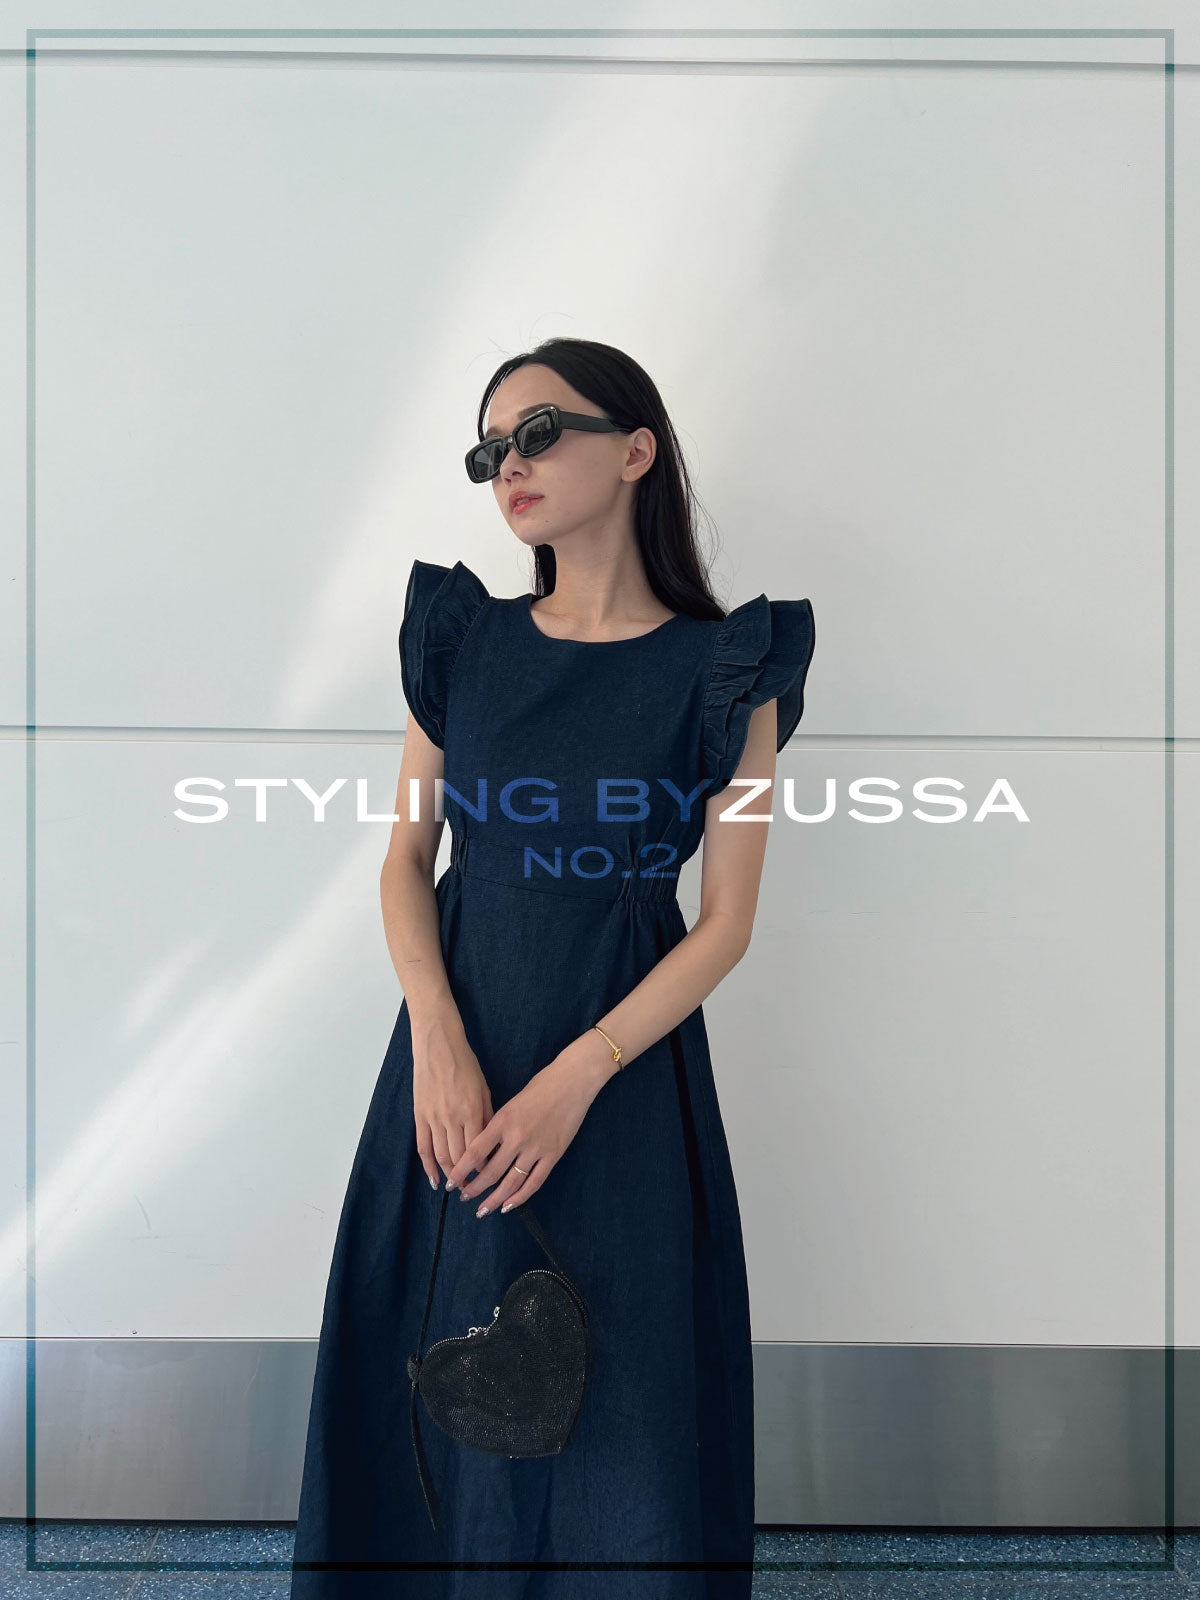 styling by zussa<br>onepiece collection